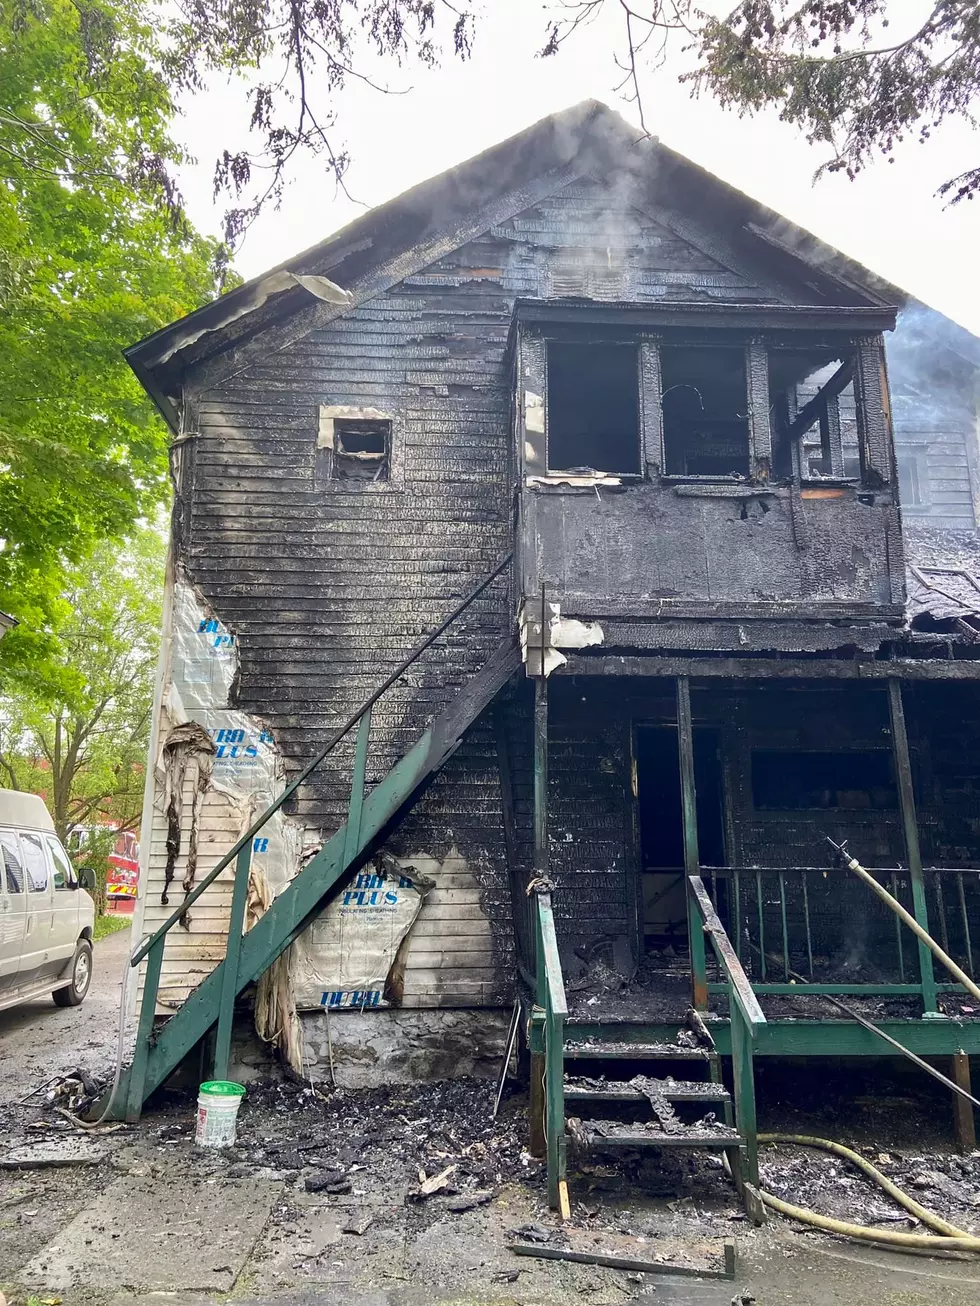 Oneonta House Fire Claims The Life of Two Dogs [Photos]